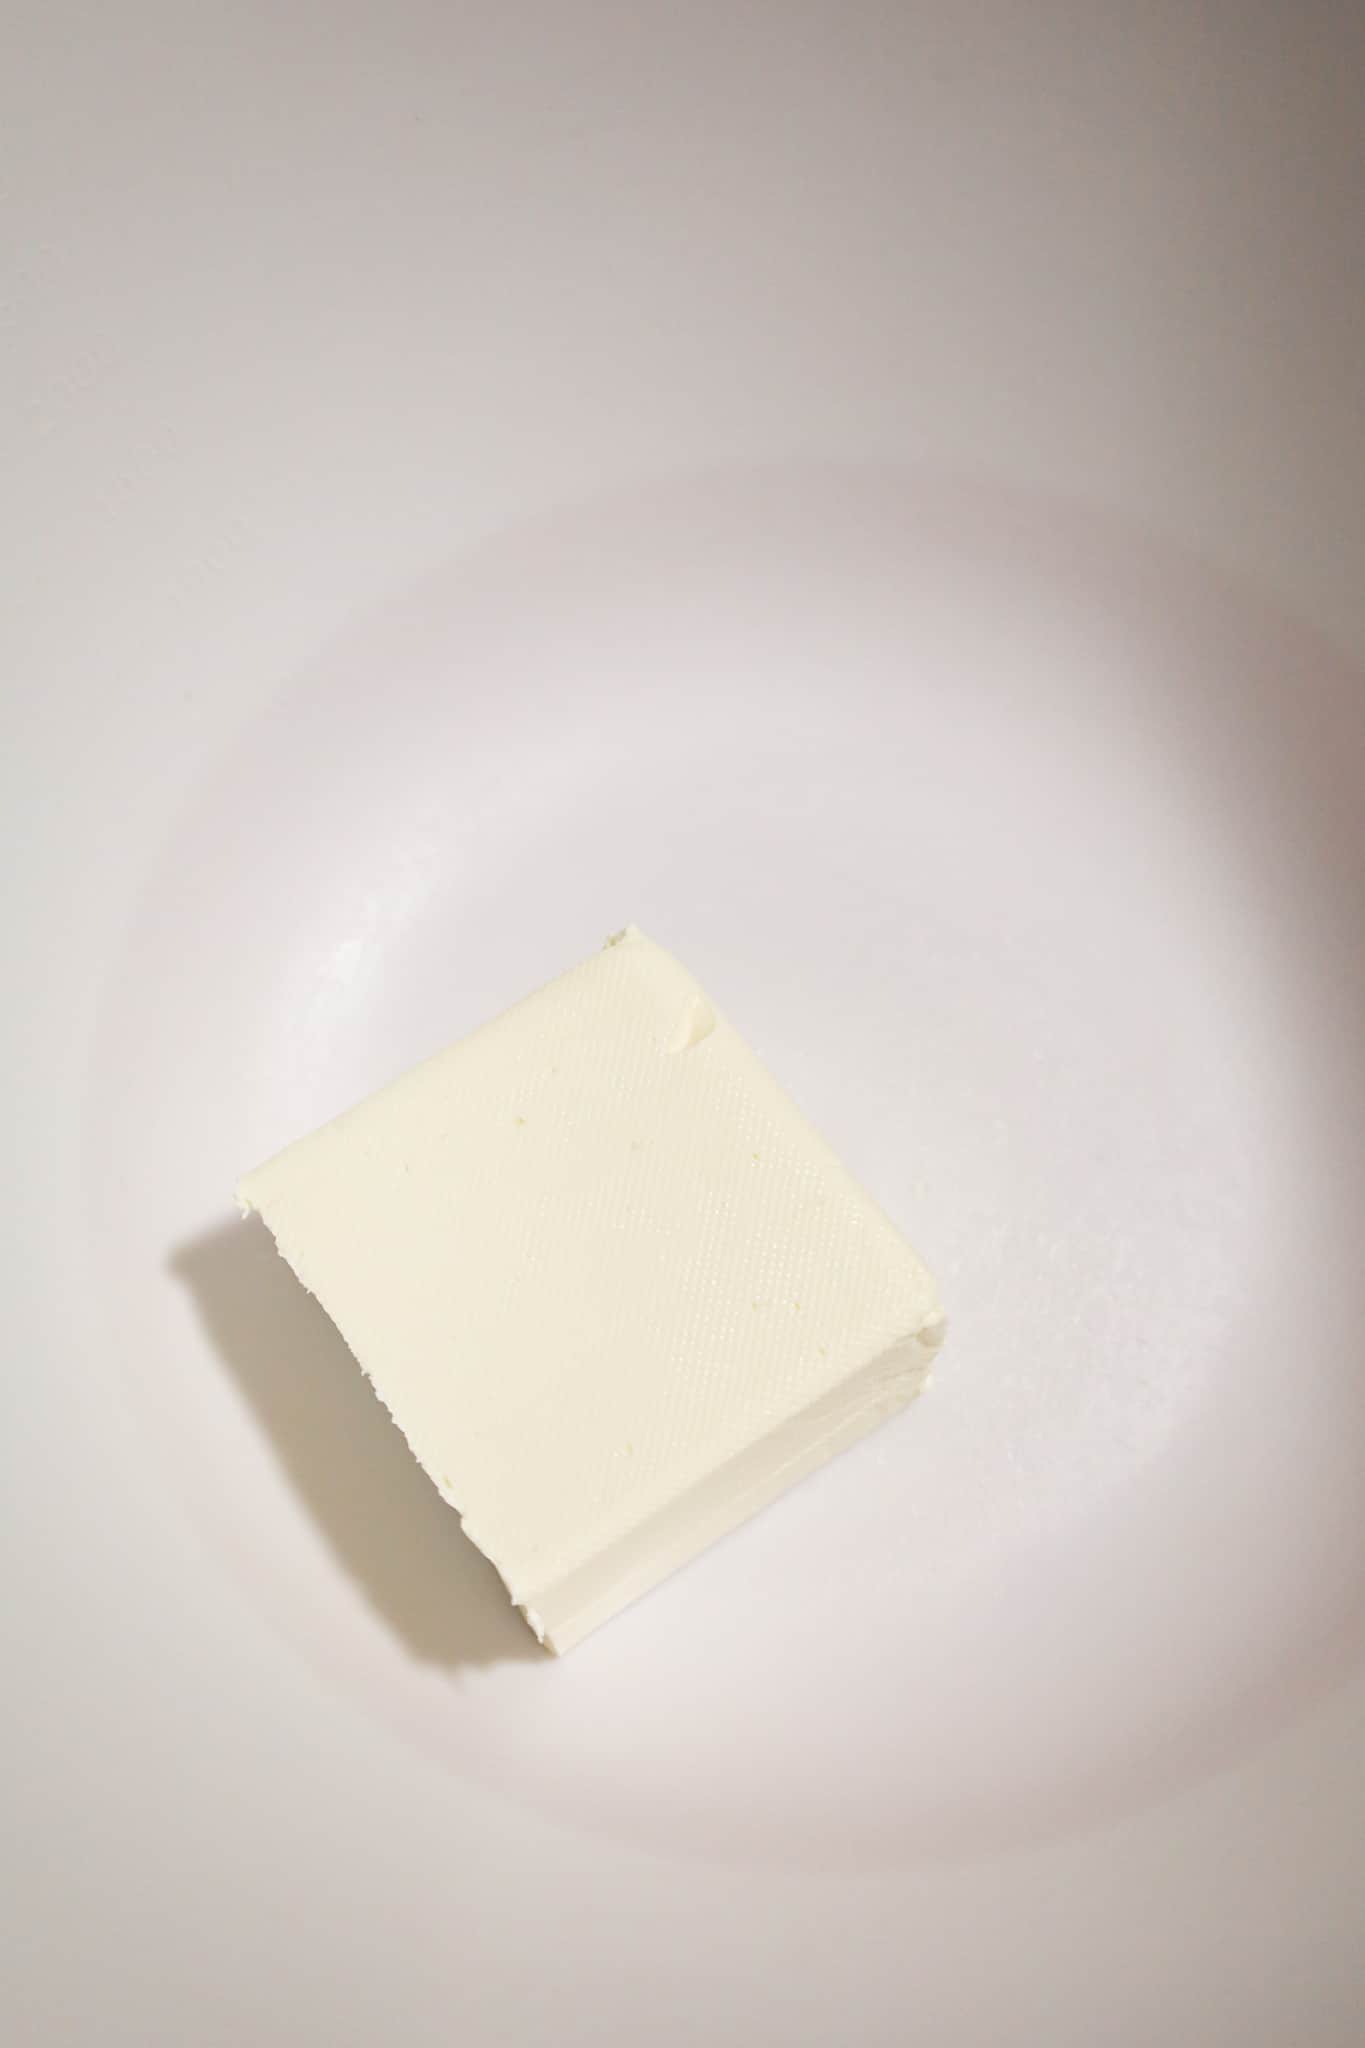 cream cheese block in a mixing bowl